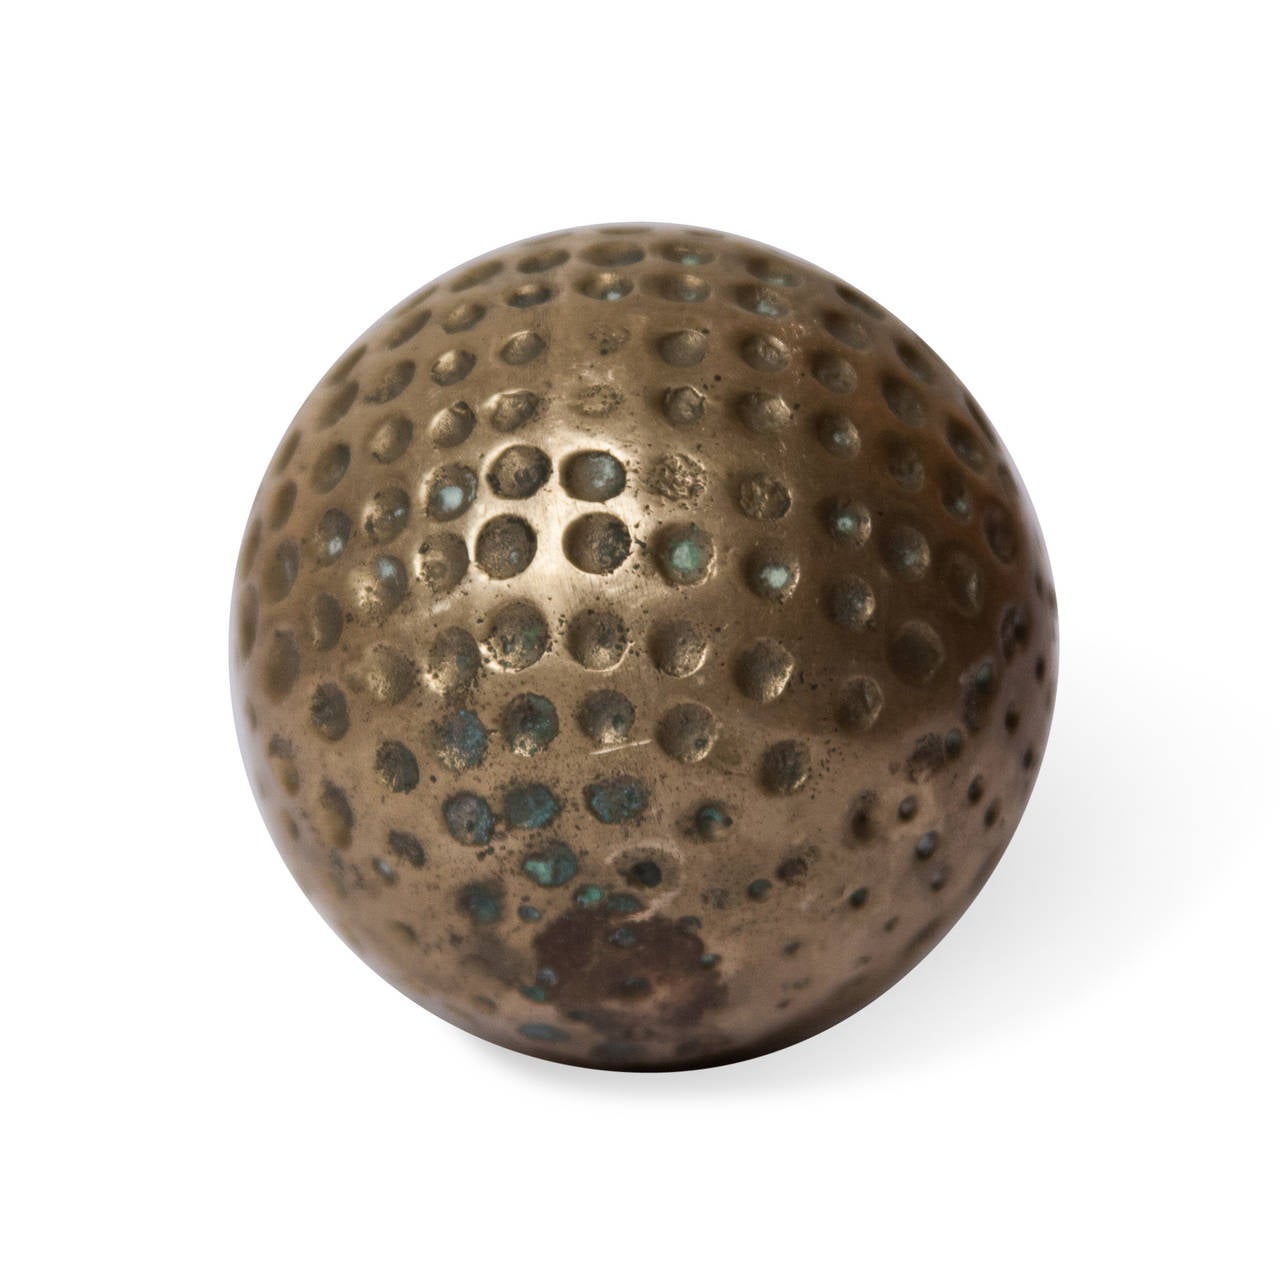 Bronze sculpture of a golf ball, spherical with dimples, American, 1960s. Spherical diameter 2 1/4 in. (Item #2258 sats) 

Condition: Some oxidation and spotting.